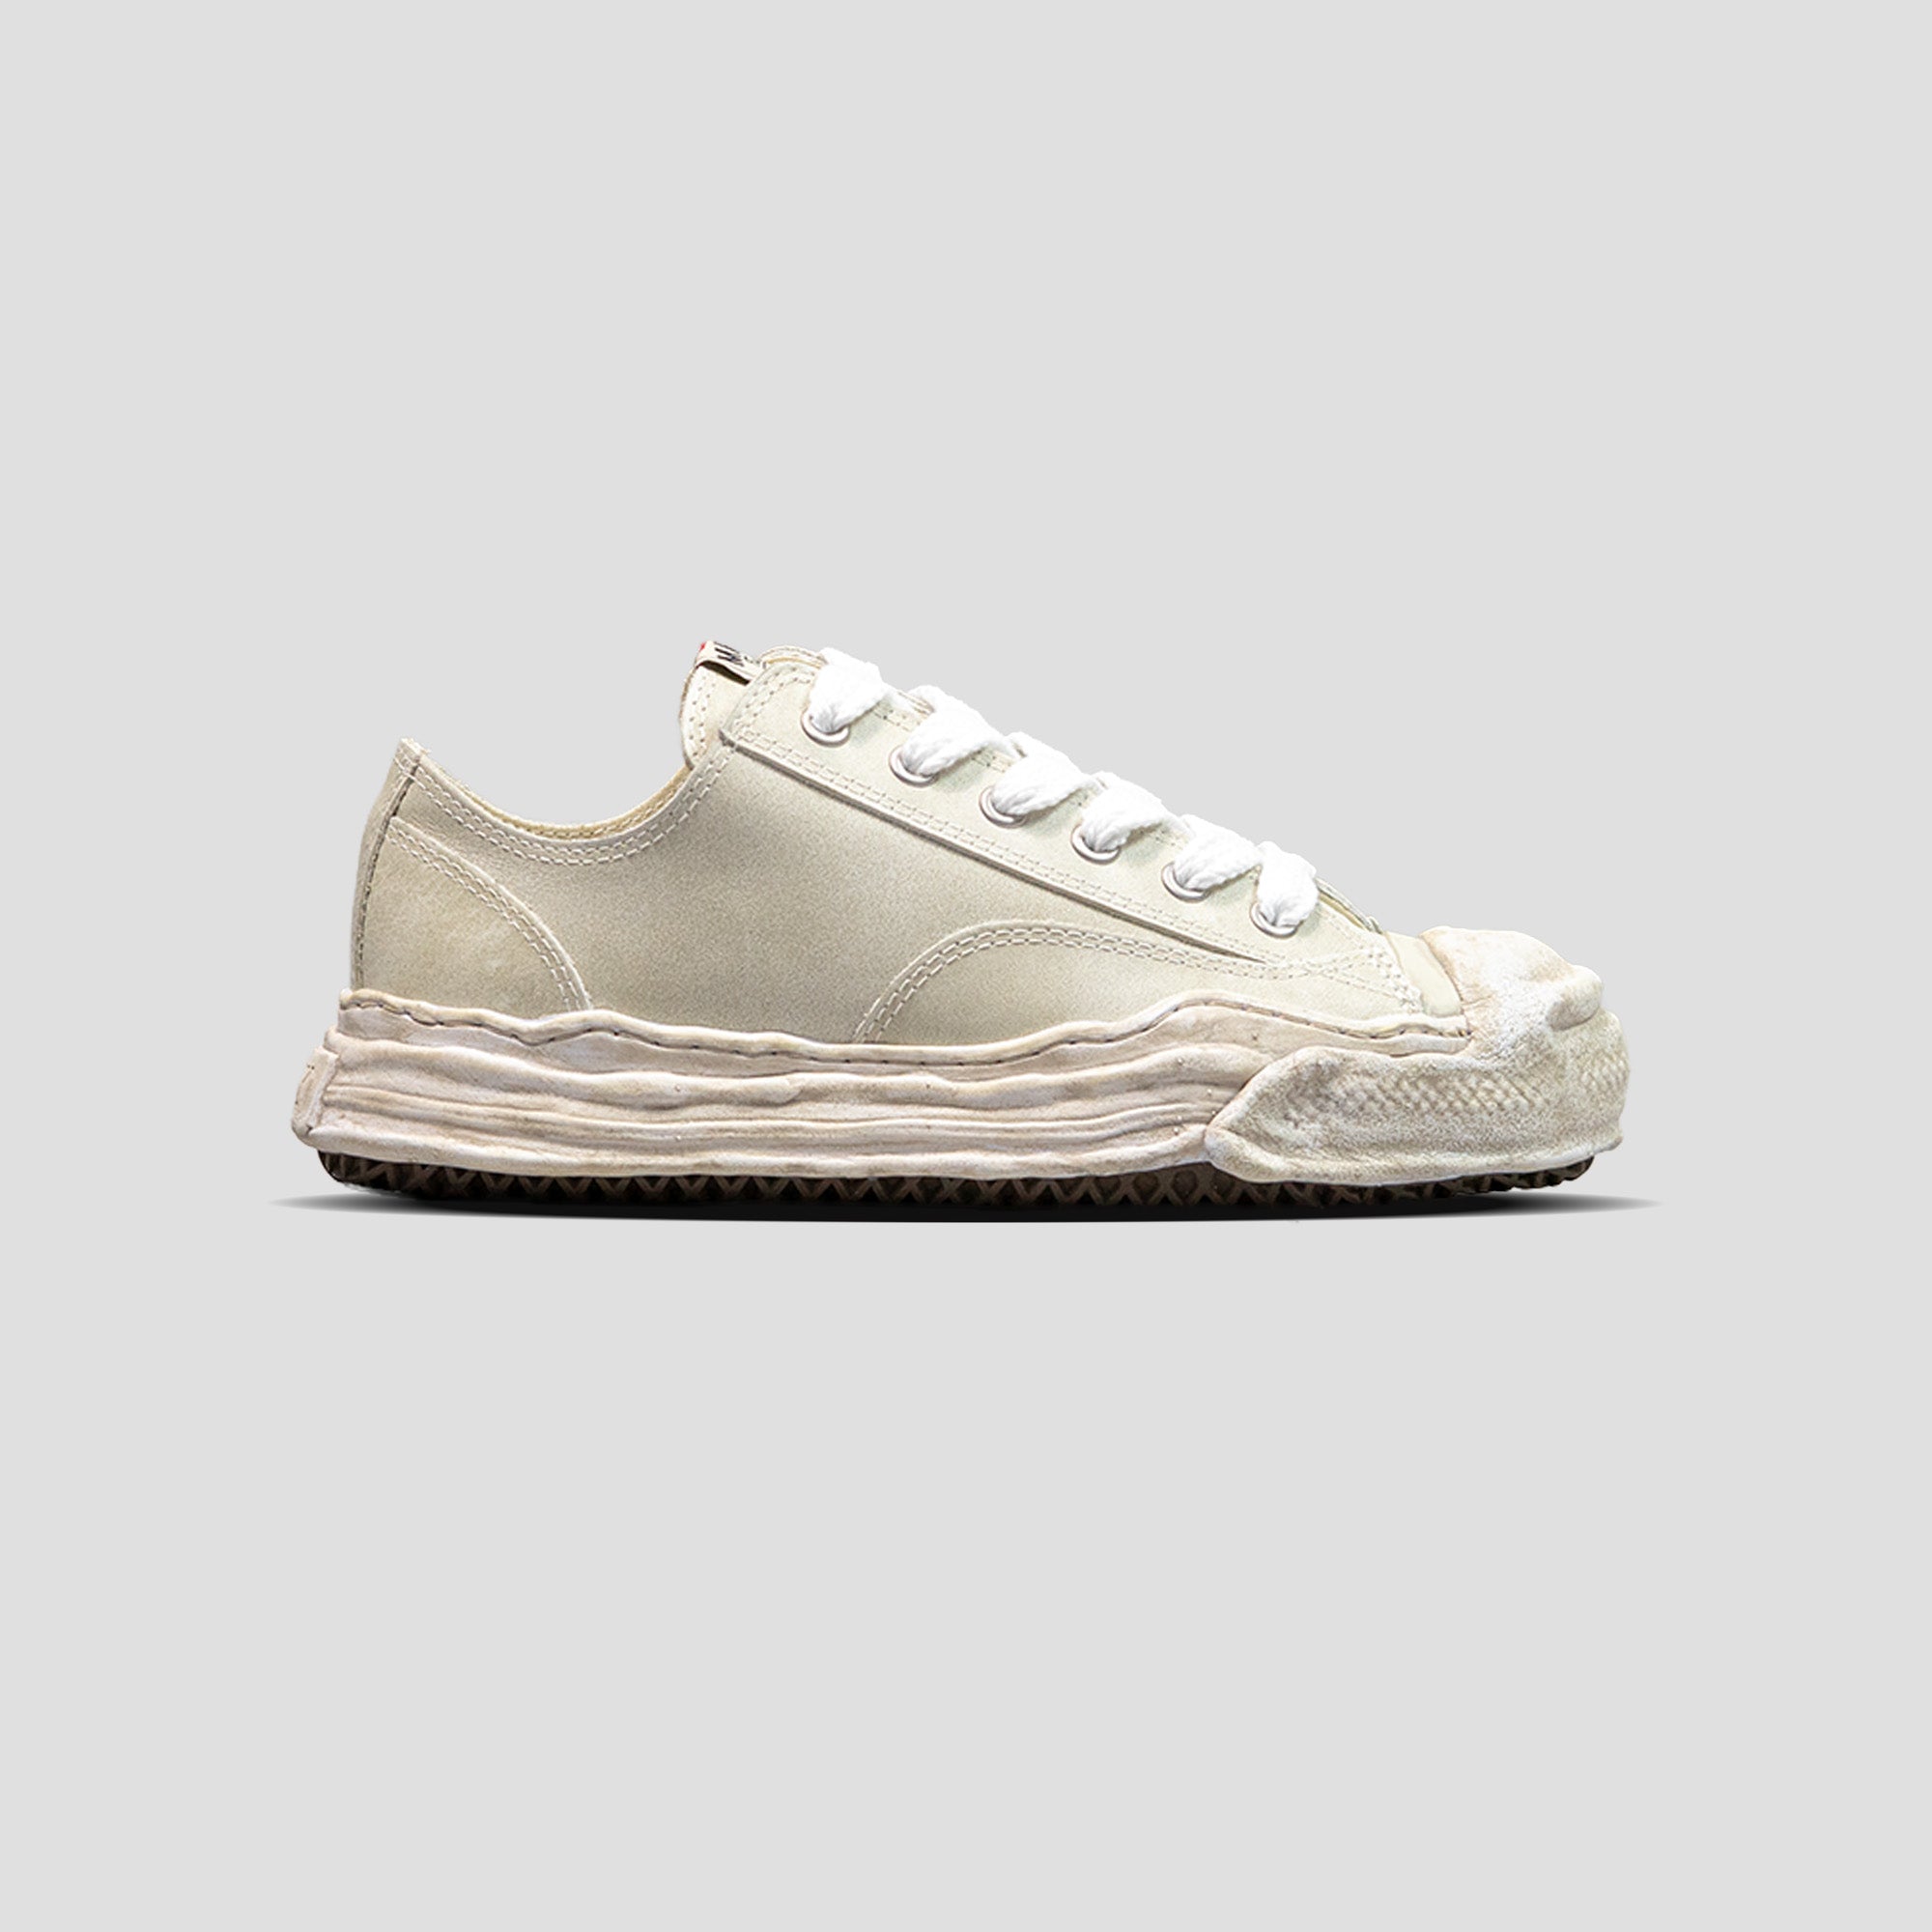 HANK OG SOLE LOW-TOP VINTAGE TREATMENT LEATHER SNEAKERS